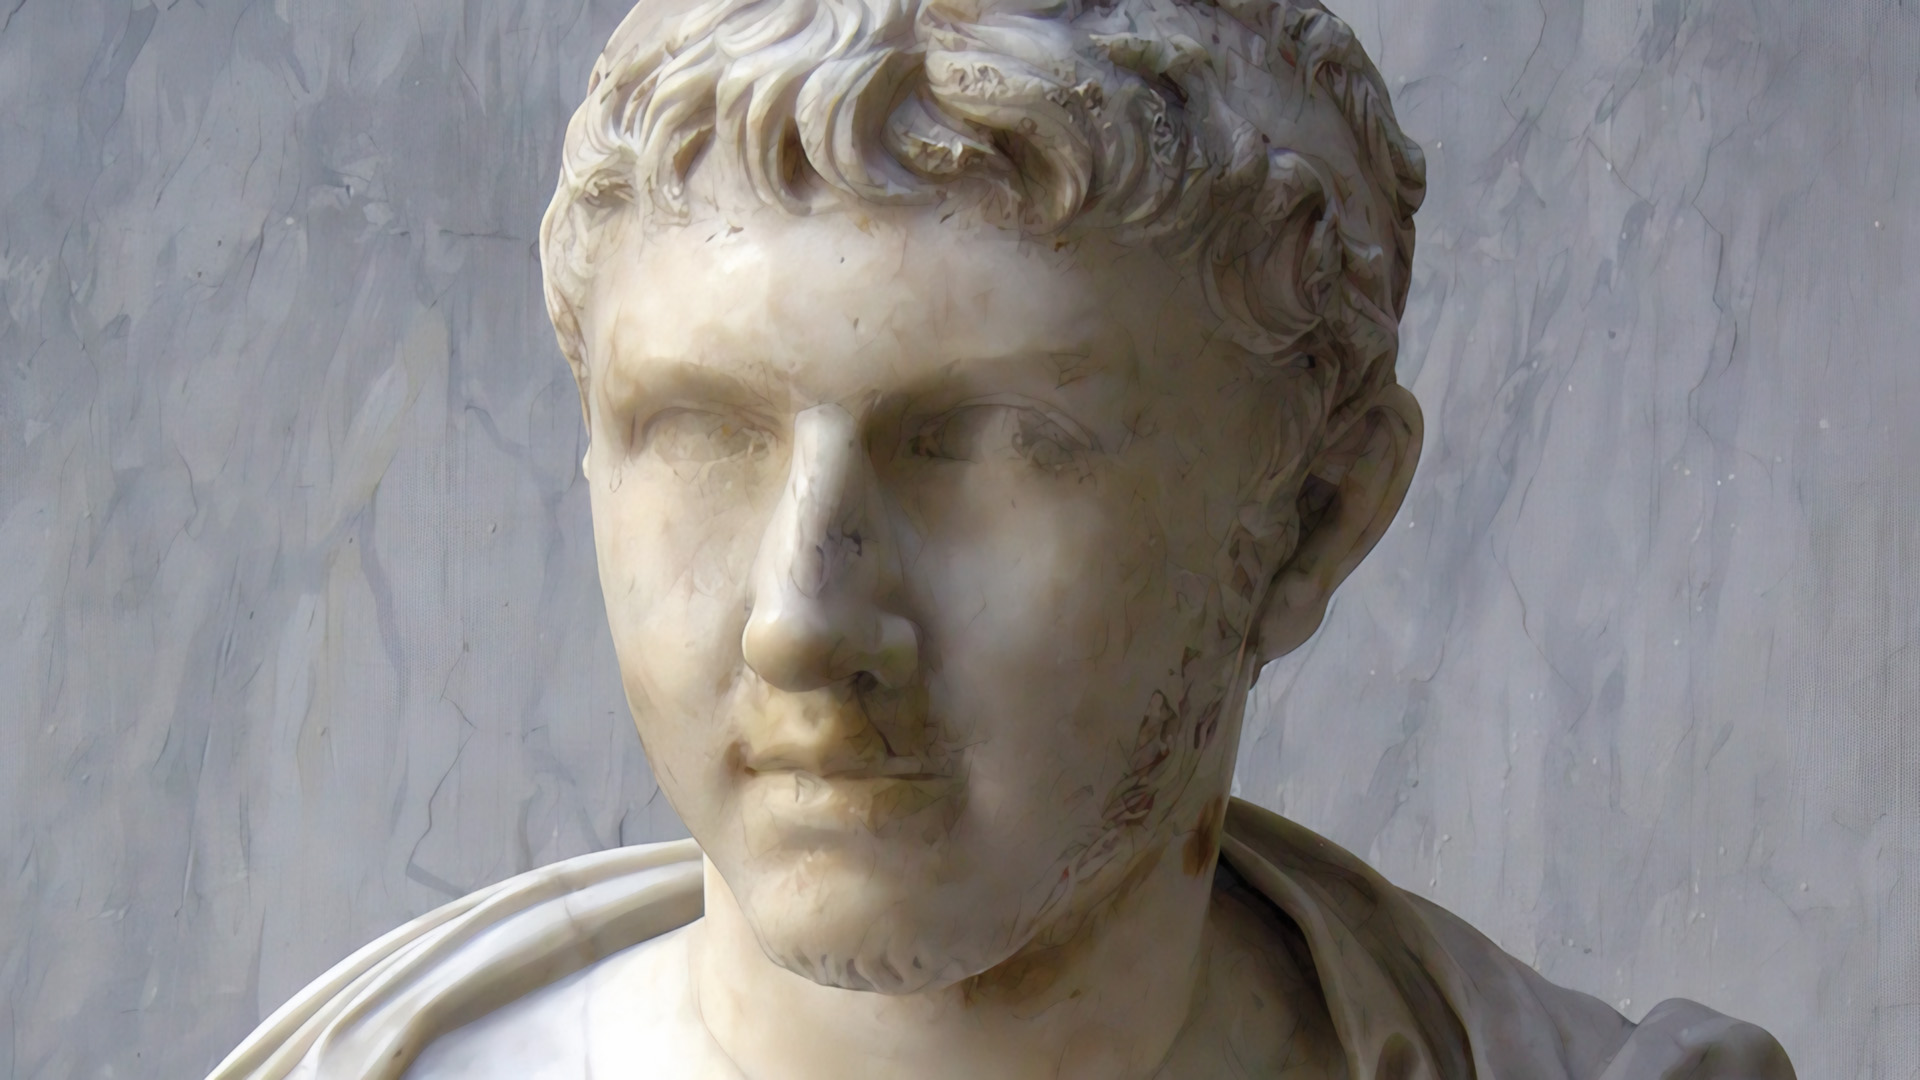 Ptolemy of Mauretania helped the Romans suppress the rebellious tribes. When he offended Caligula he was put to death.